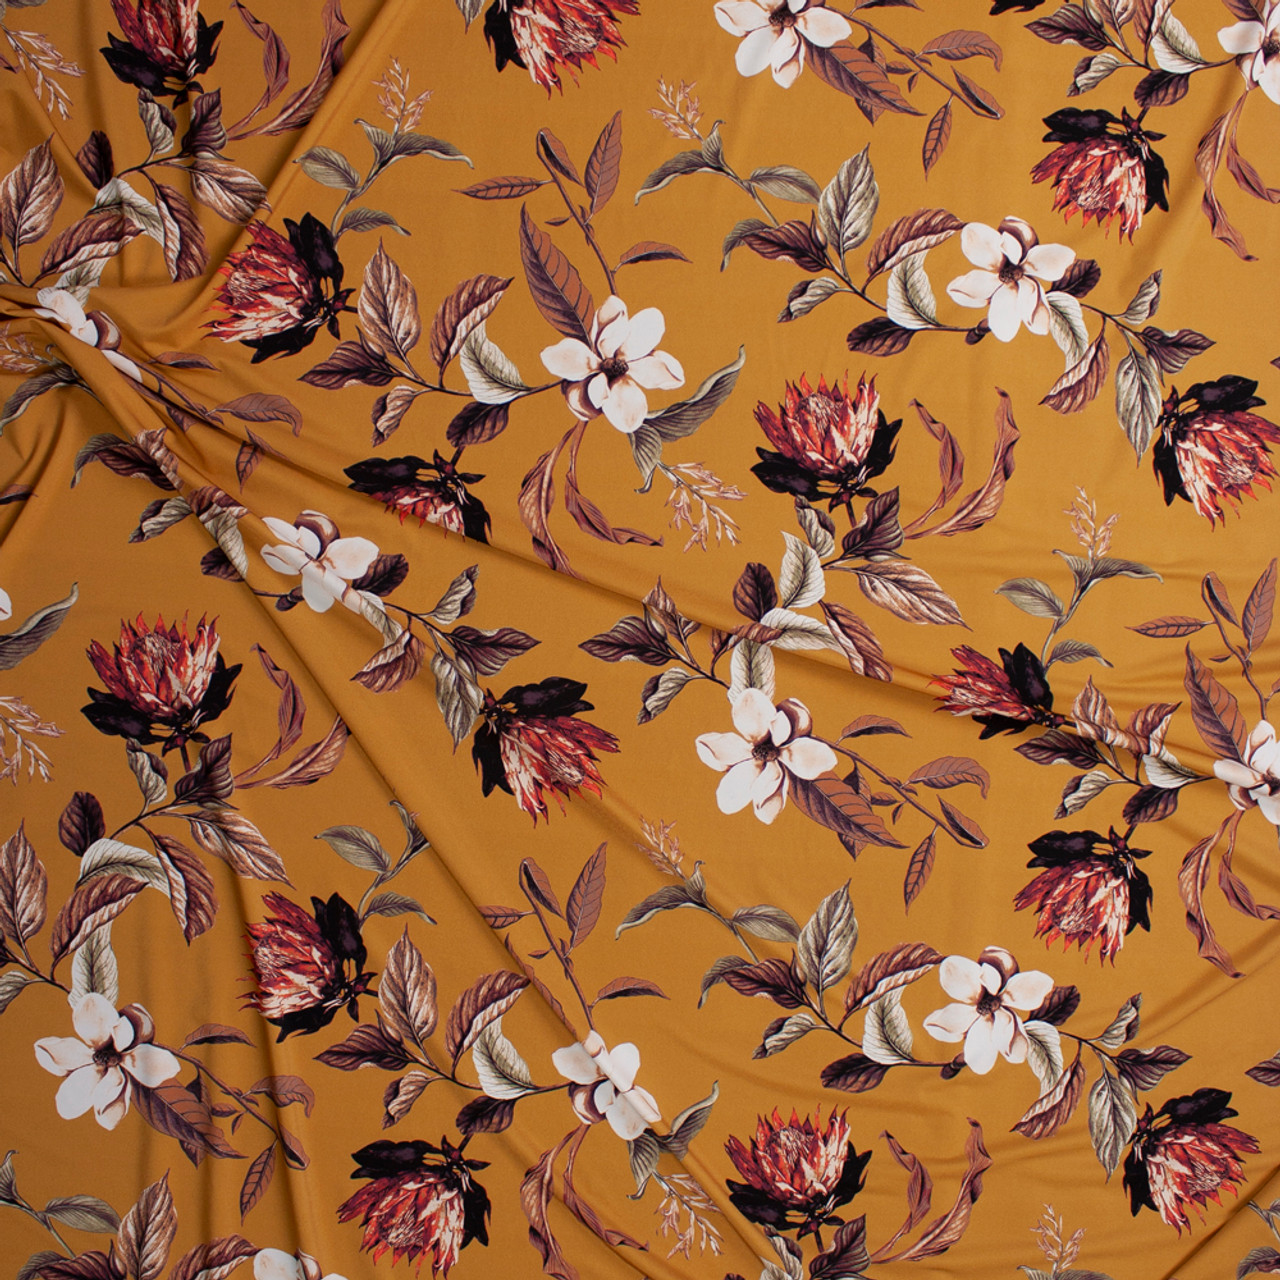 Cali Fabrics Burnt Orange, Taupe, and Offwhite Floral on Mustard ...